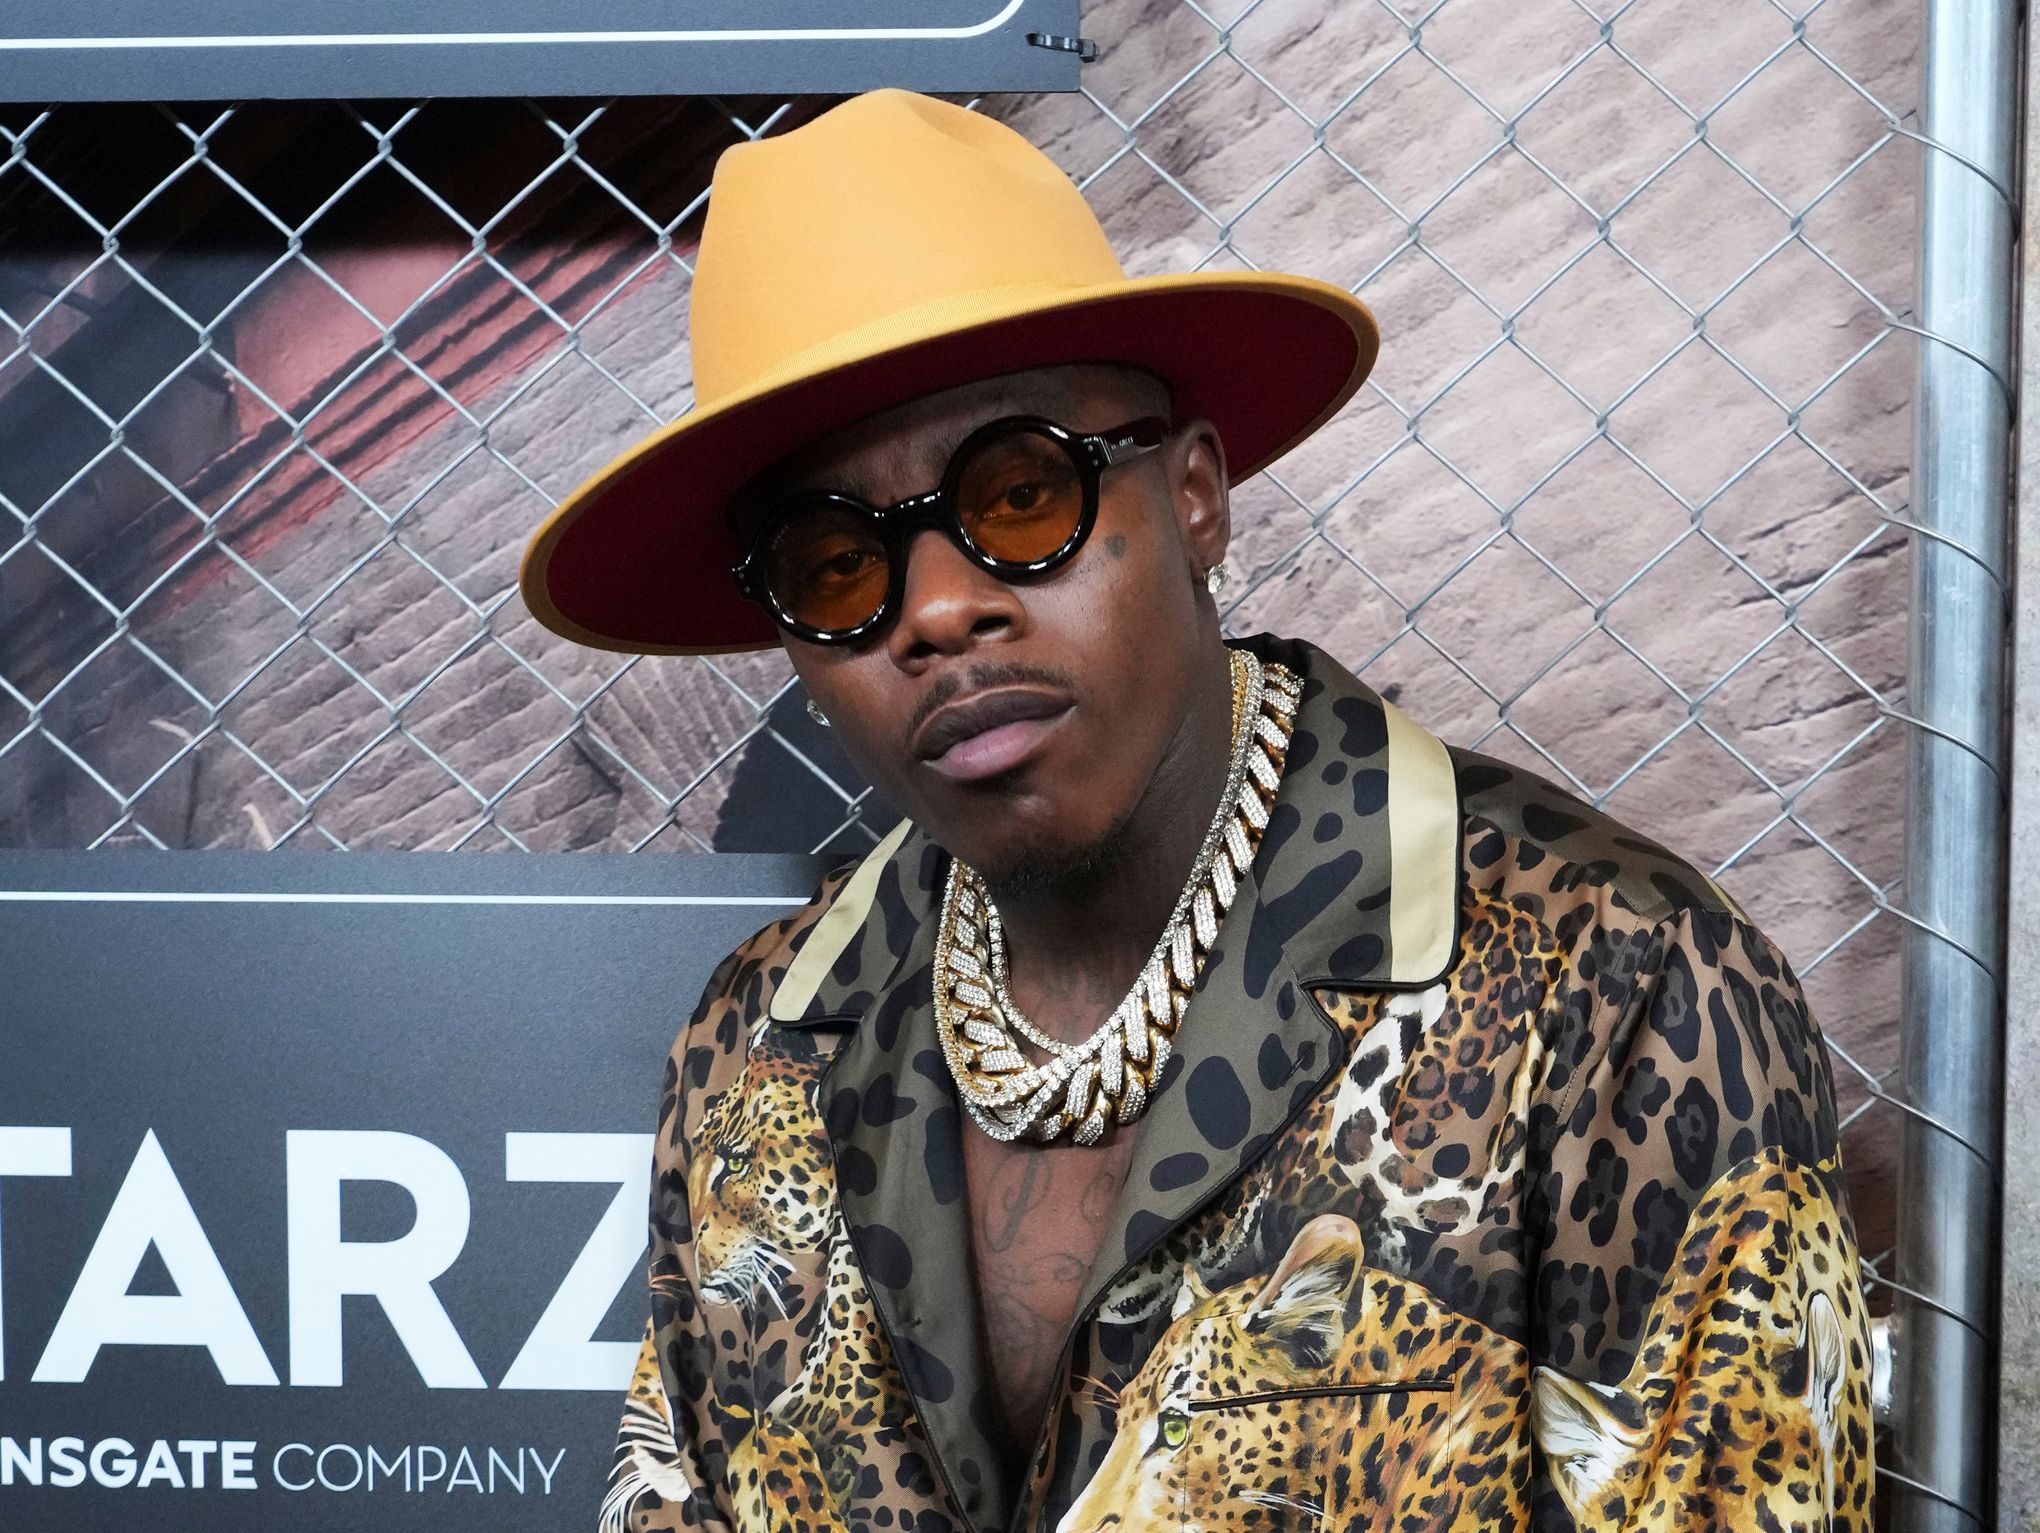 DaBaby Hats : A Look Into The Rappers Array of Hats & Caps